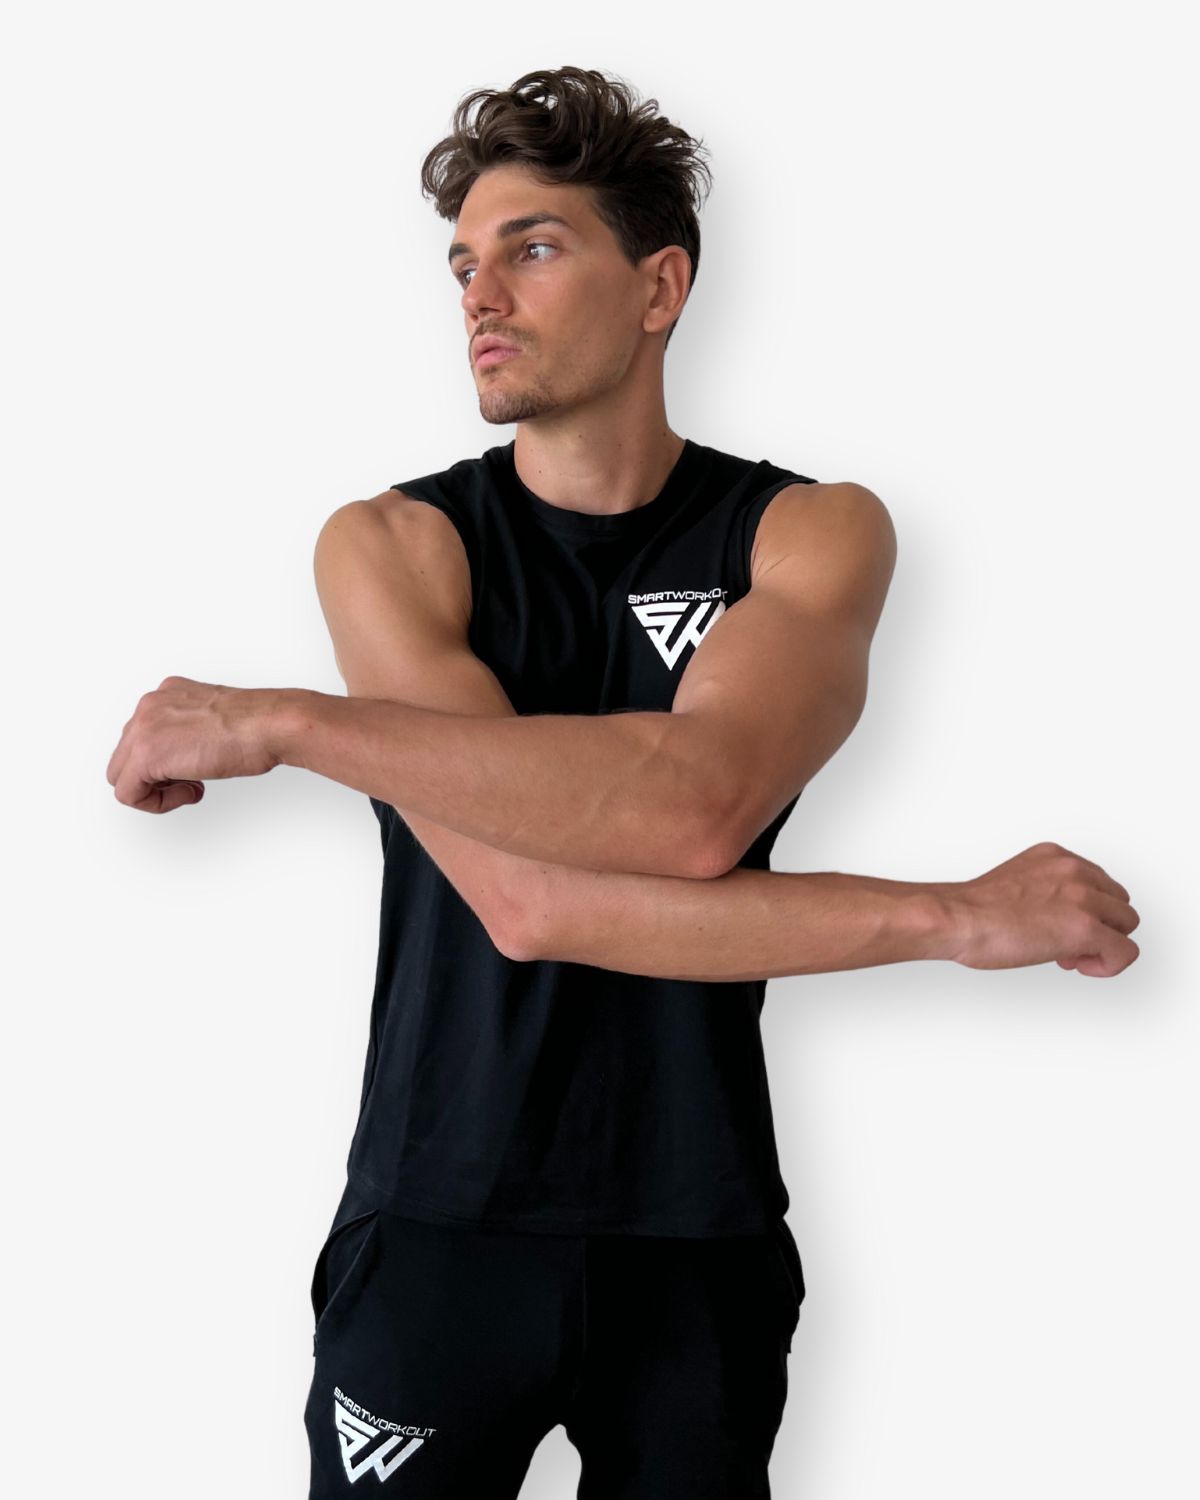 SmartWorkout Athletic Top